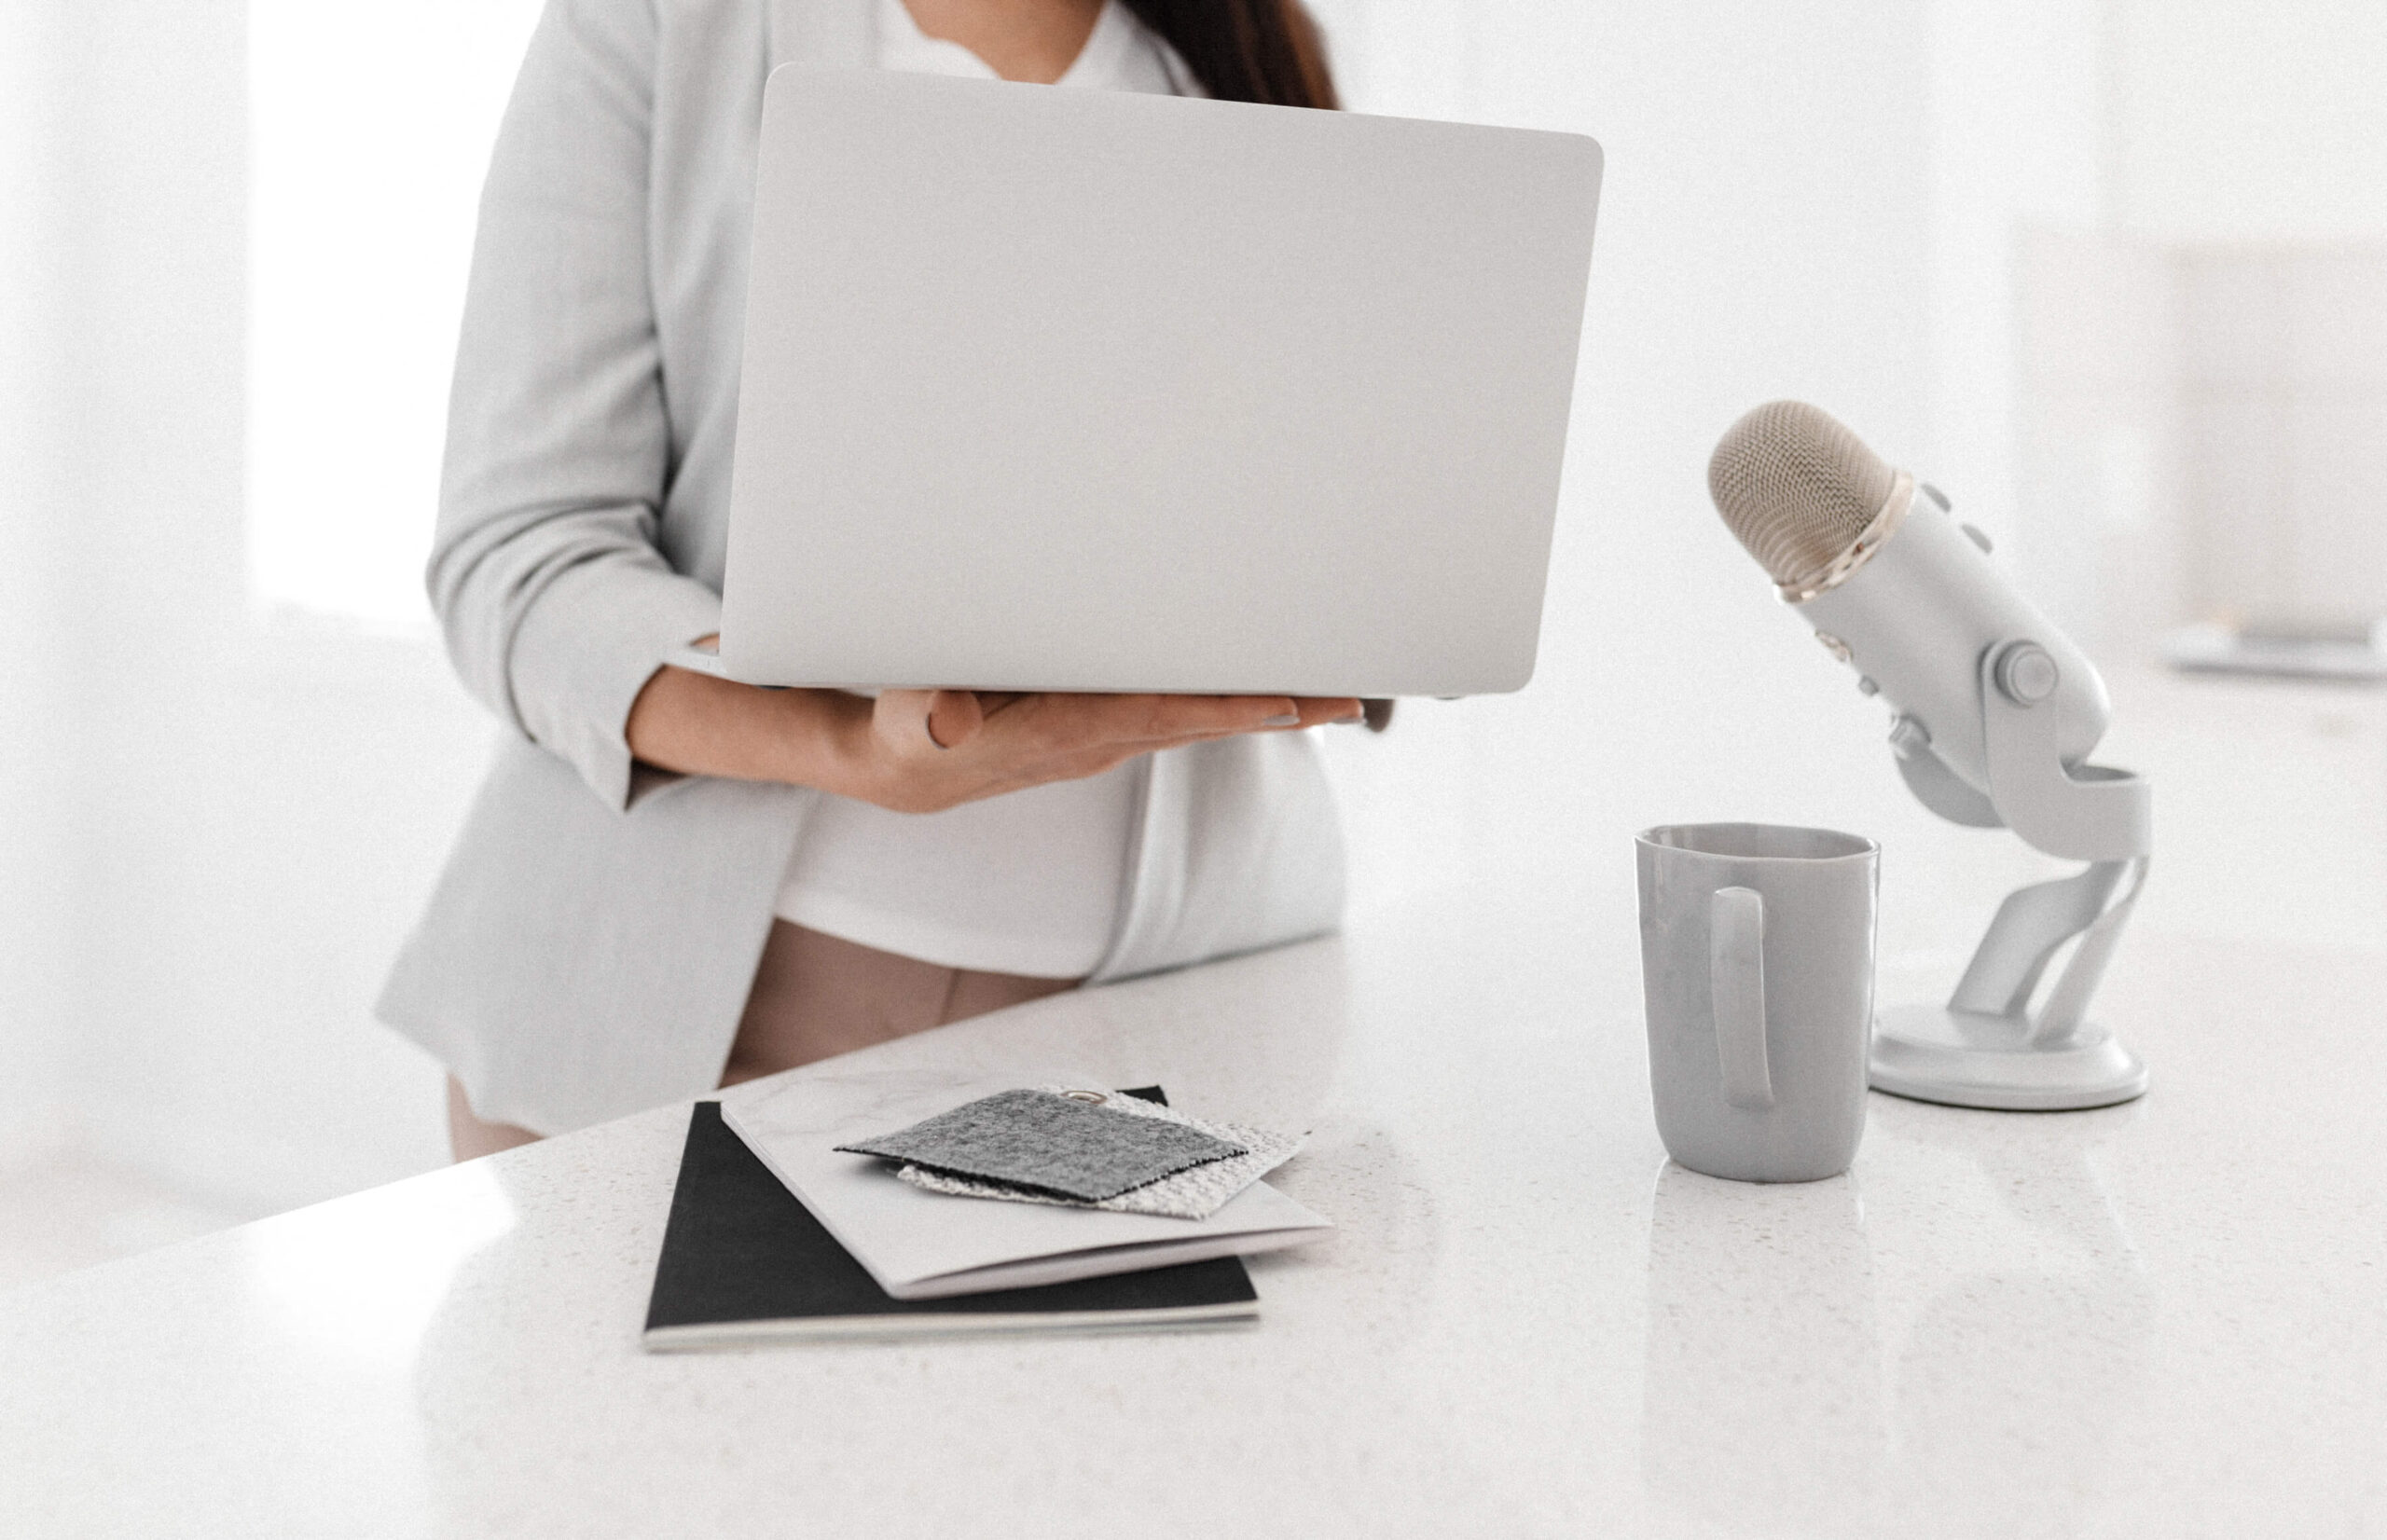 Podcast Host vs. Podcast Guest: Which strategy is right for you? 3